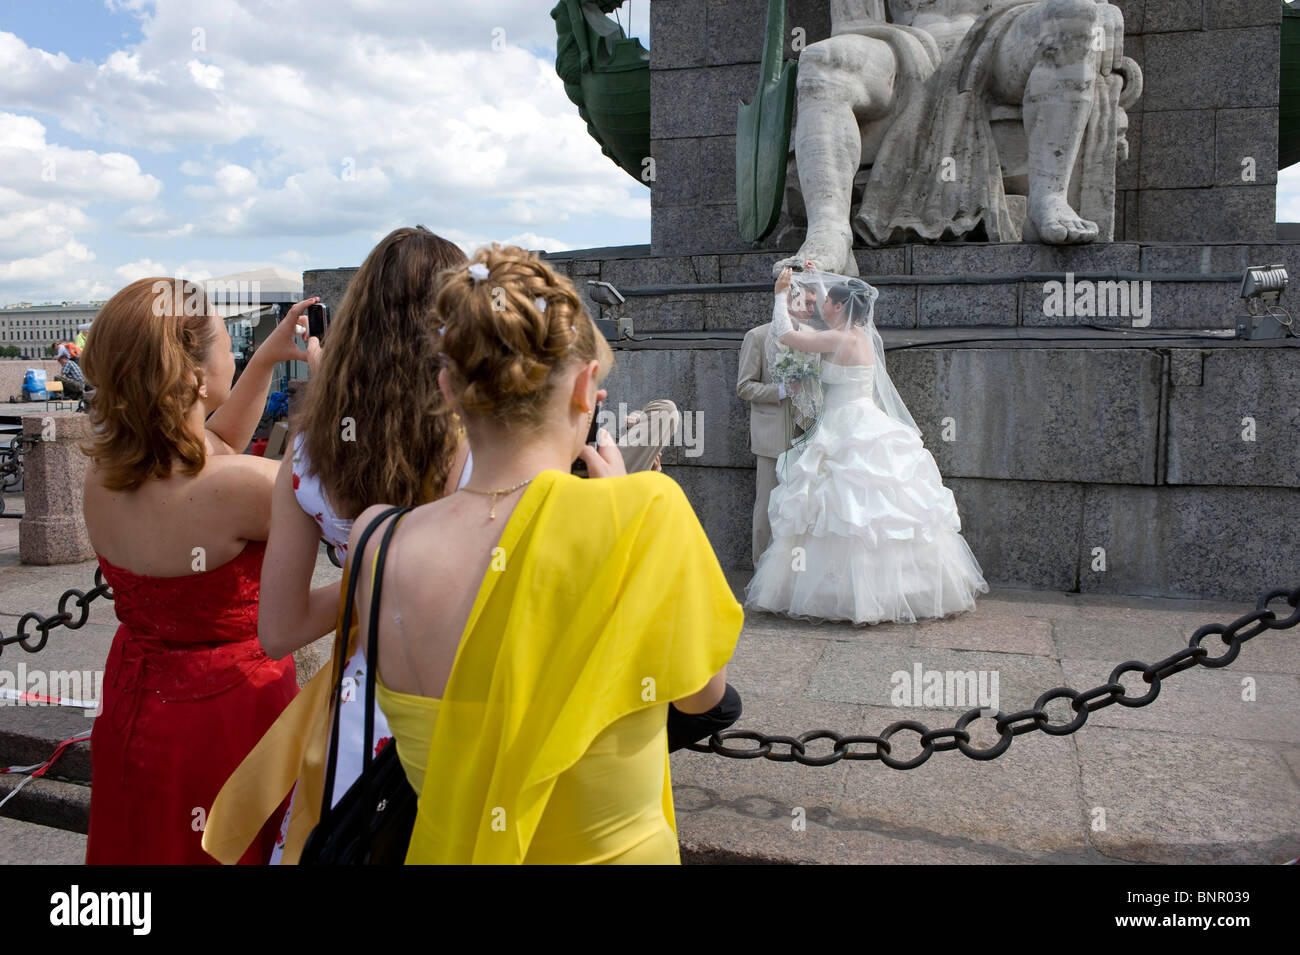 A bridal couple at the Peter and Paul Fortress, Saint Petersburg, Russia Stock Photo